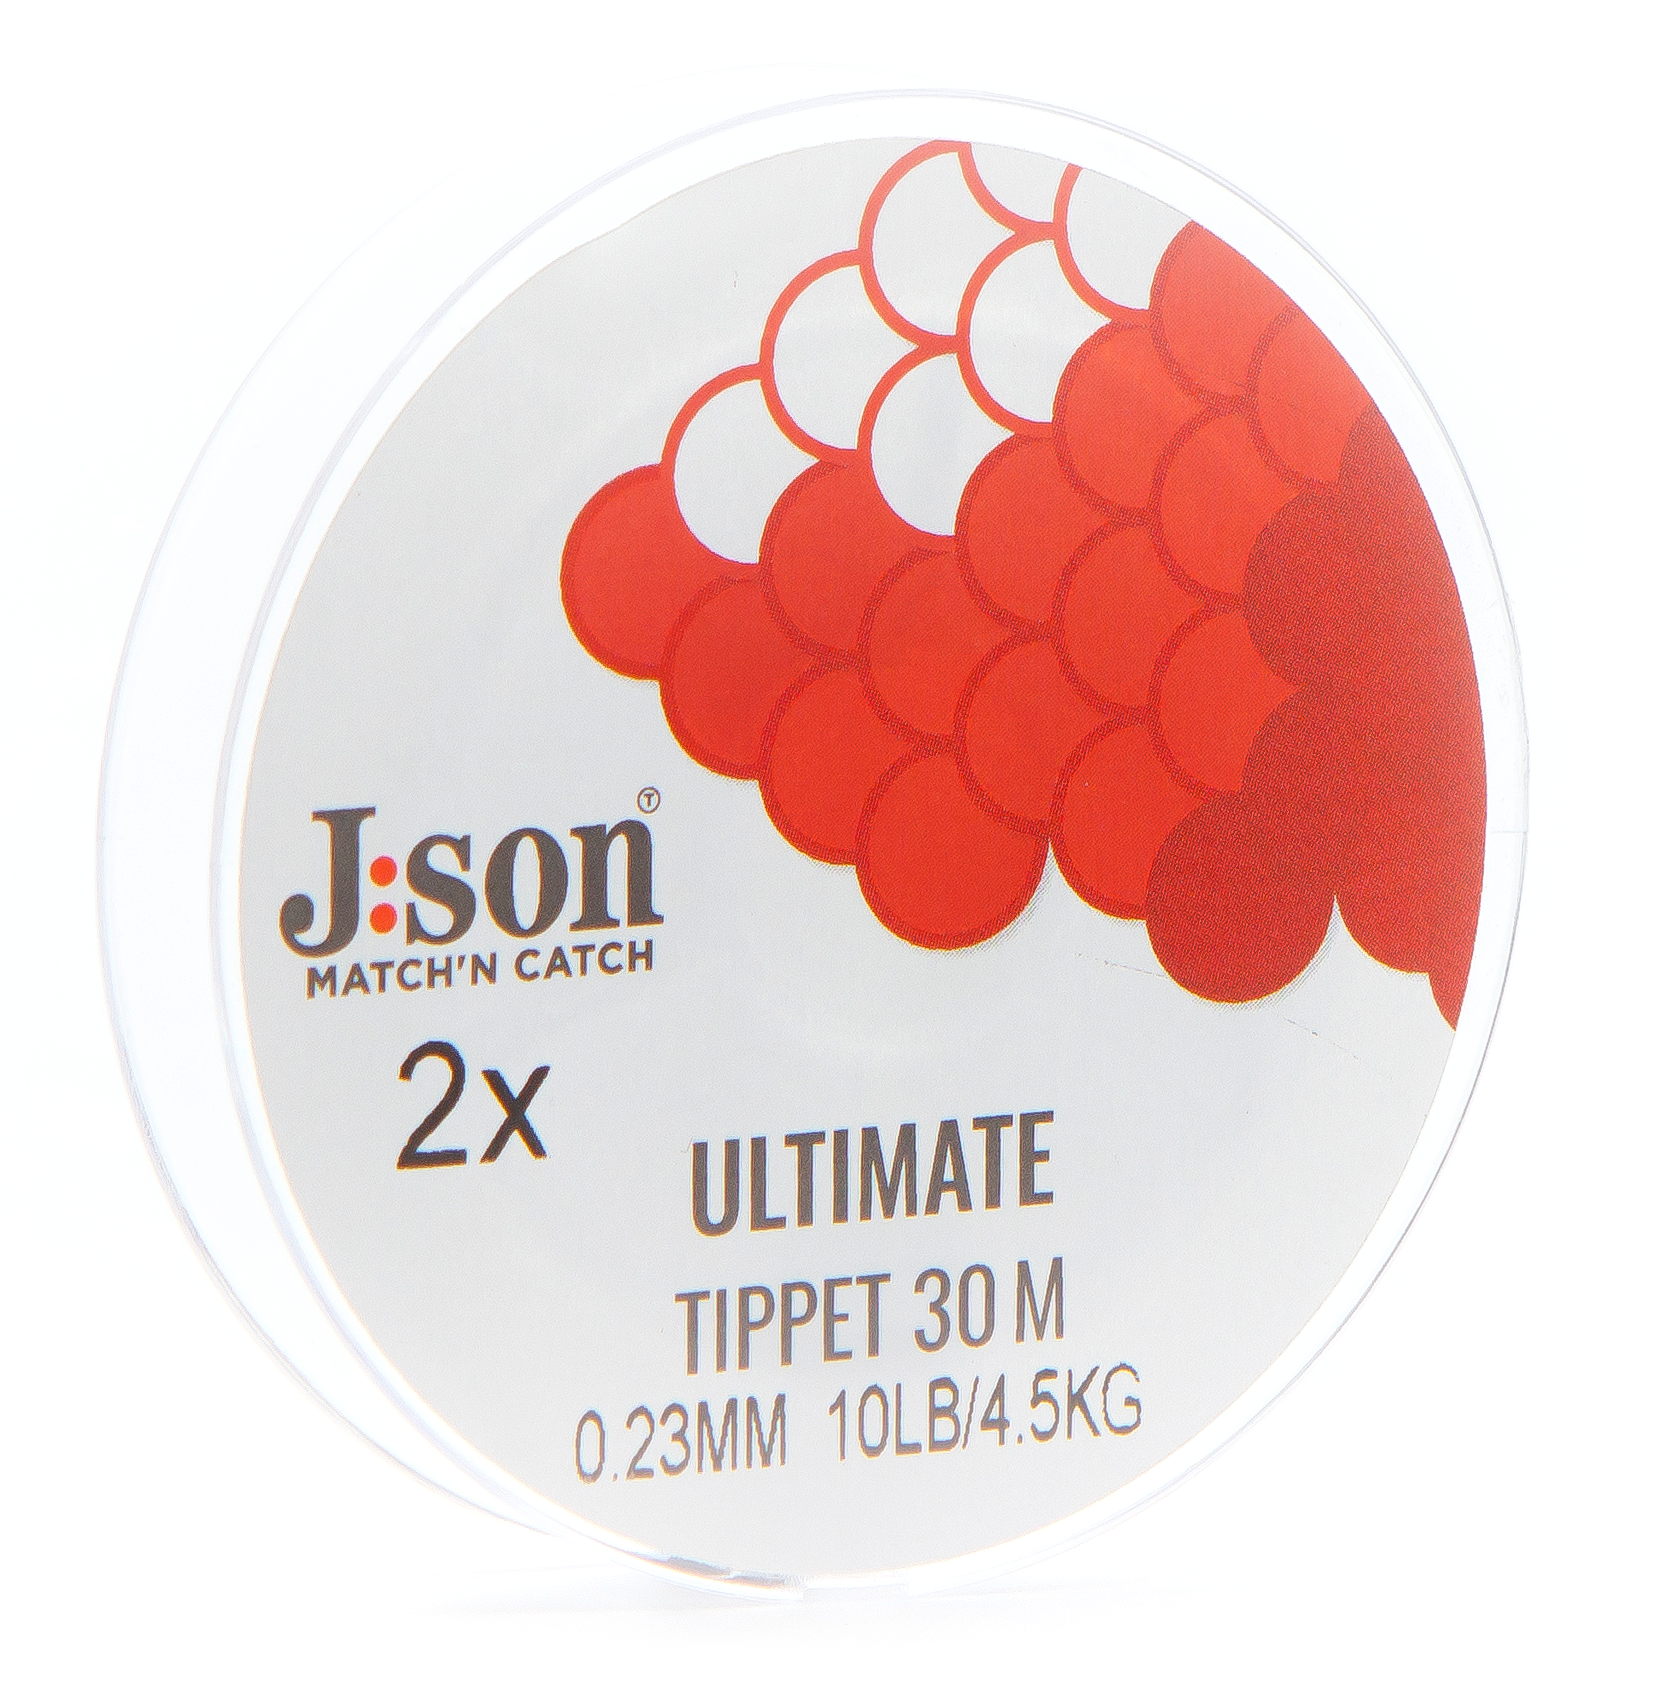 Json Ultimate Tippet 30 m 2X 0.23mm